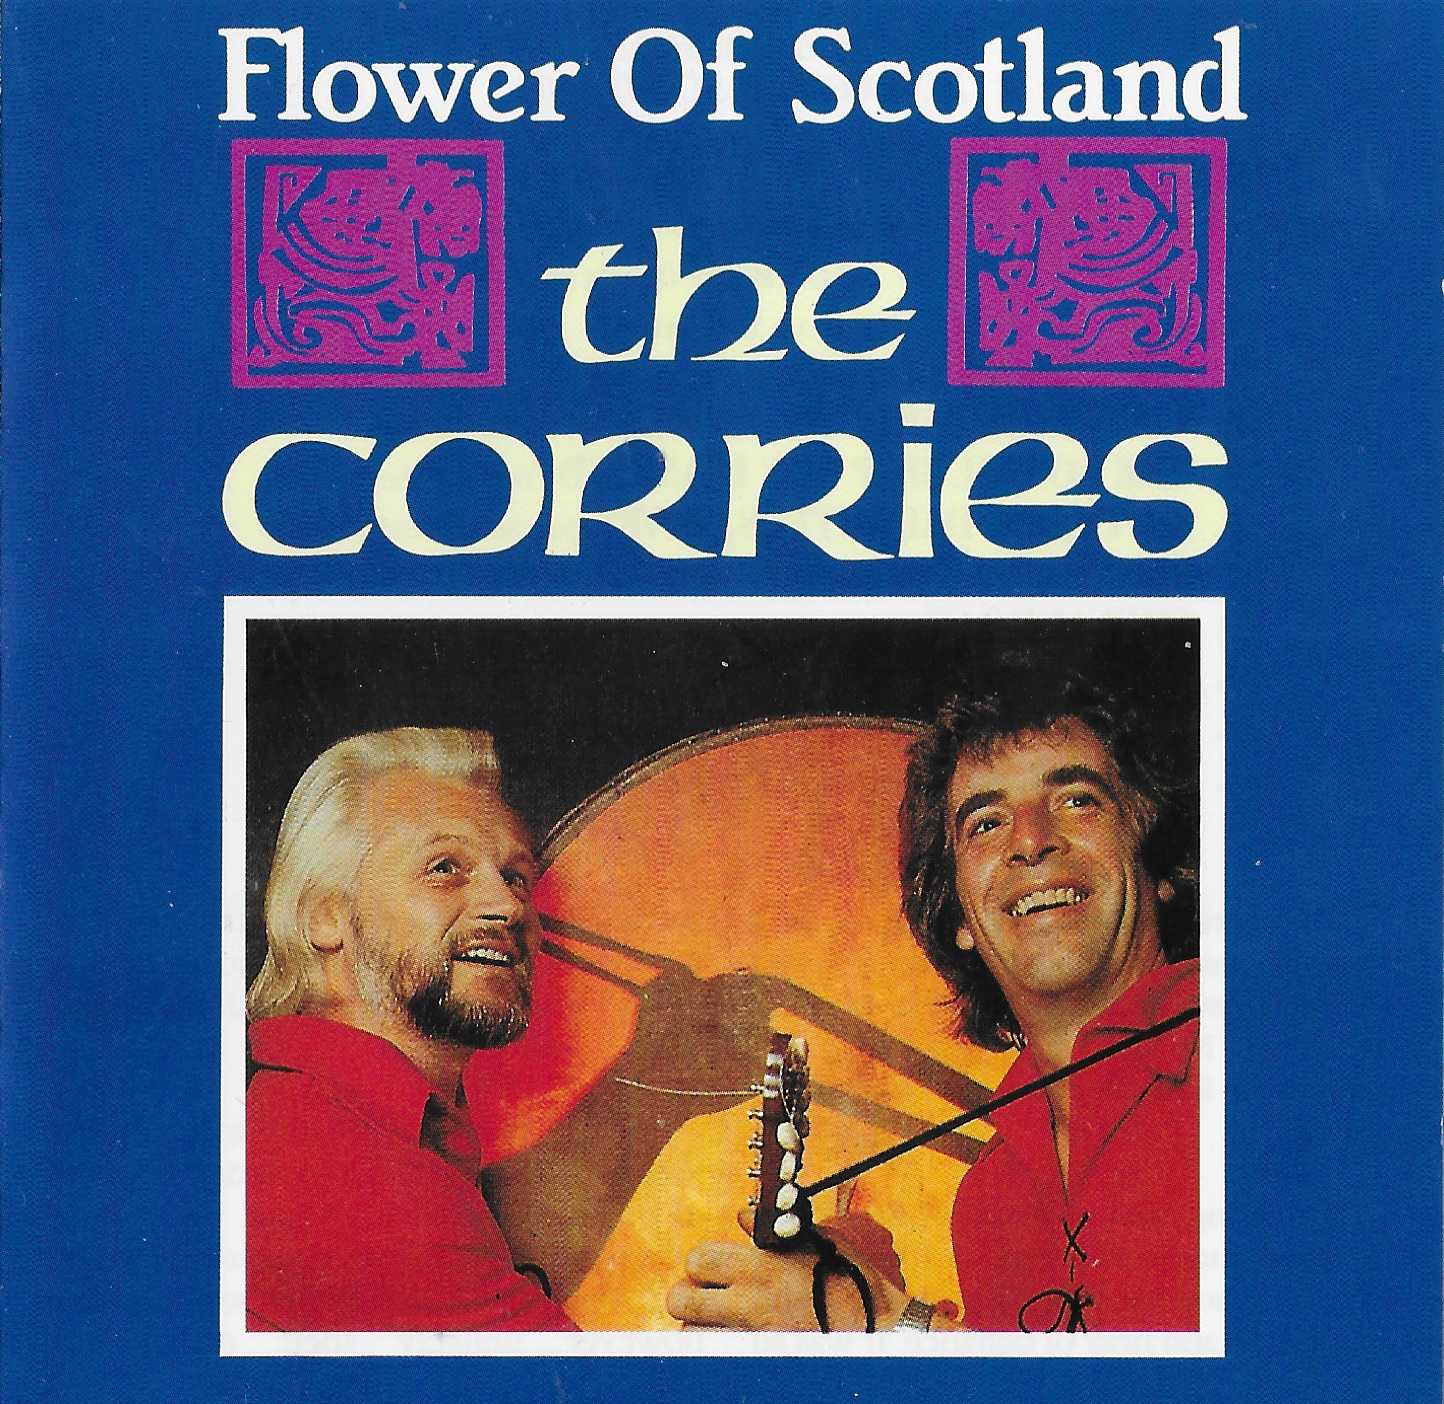 Picture of BBCCD820 Flowers of Scotland by artist The Corries from the BBC records and Tapes library